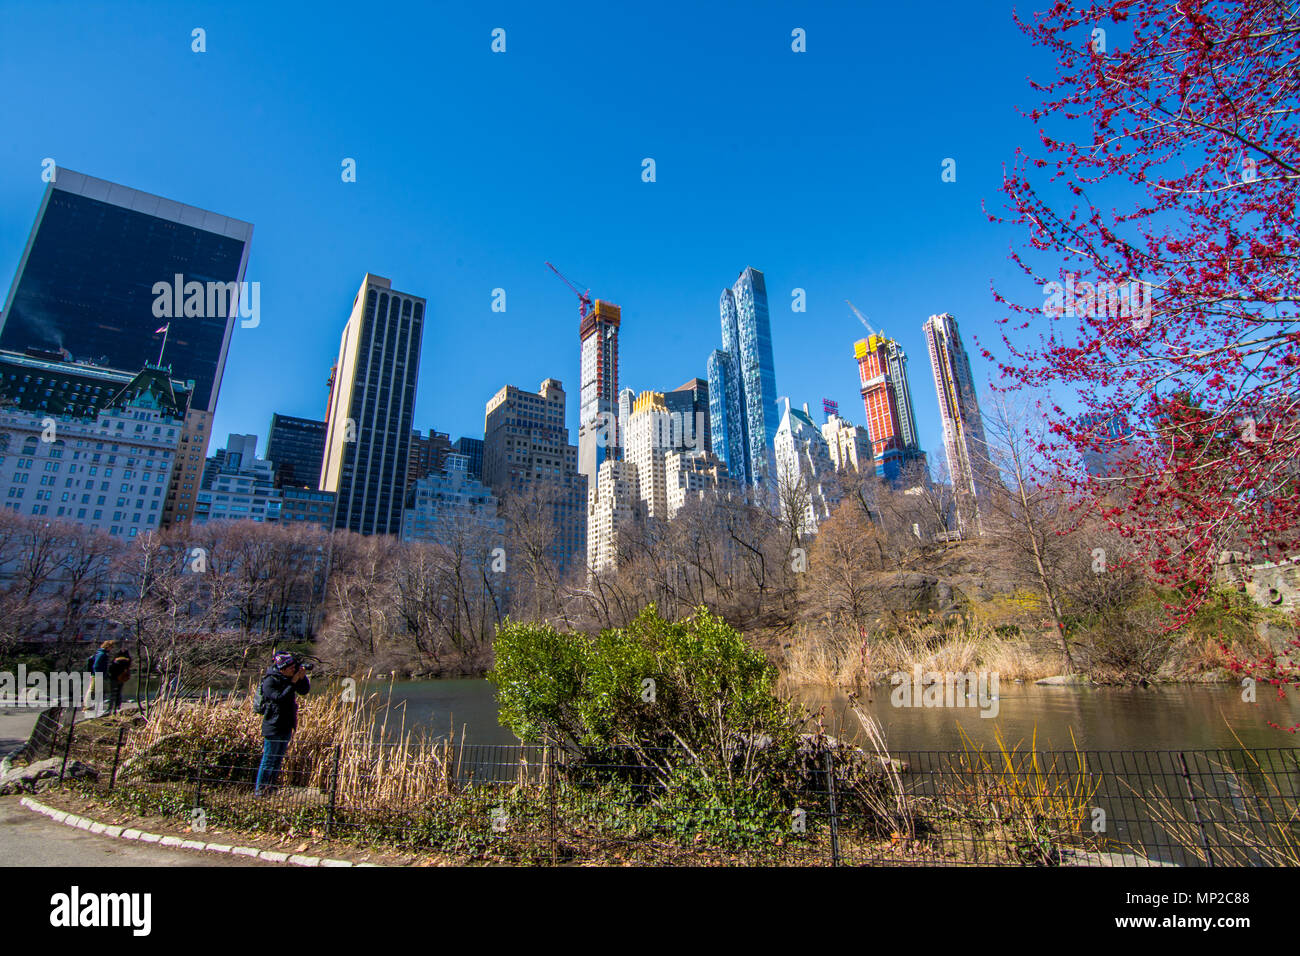 New York, US - March 31, 2018: View of the central park in early spring with skyscrapers on the background on a sunny day Stock Photo